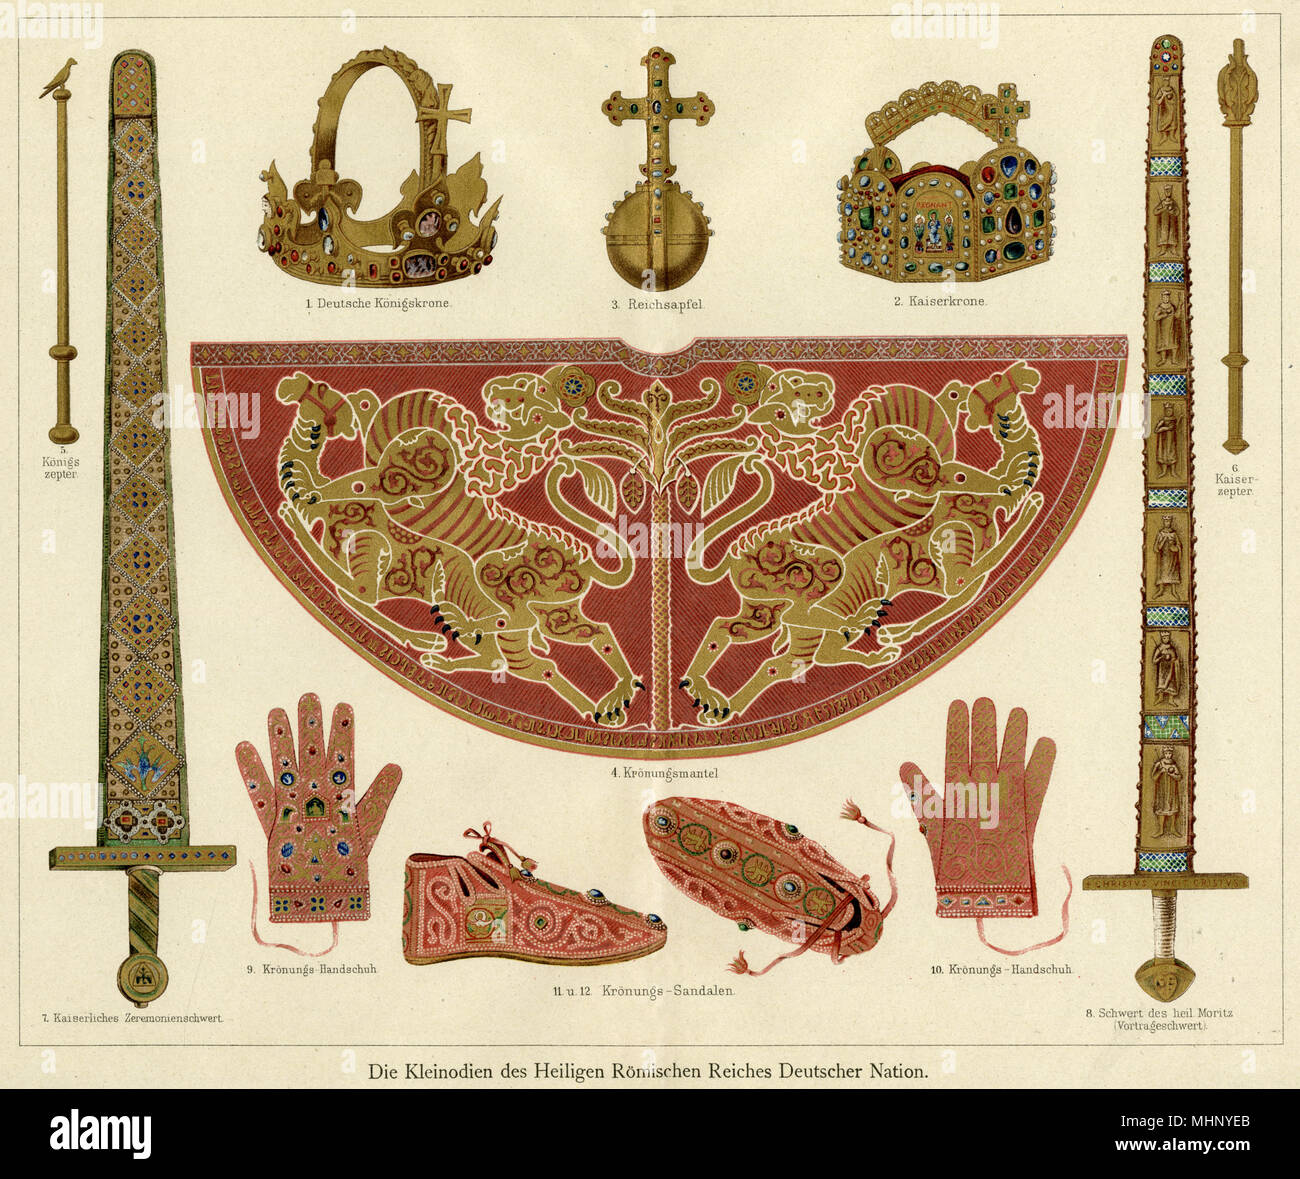 Some of the coronation regalia of the Holy Roman Empire of the German  Nation: 1. German Royal Crown; 2. Imperial Crown; 3. Orb; 4. Coronation  Robe; 5. King's Sceptre; 6. Imperial Sceptre;